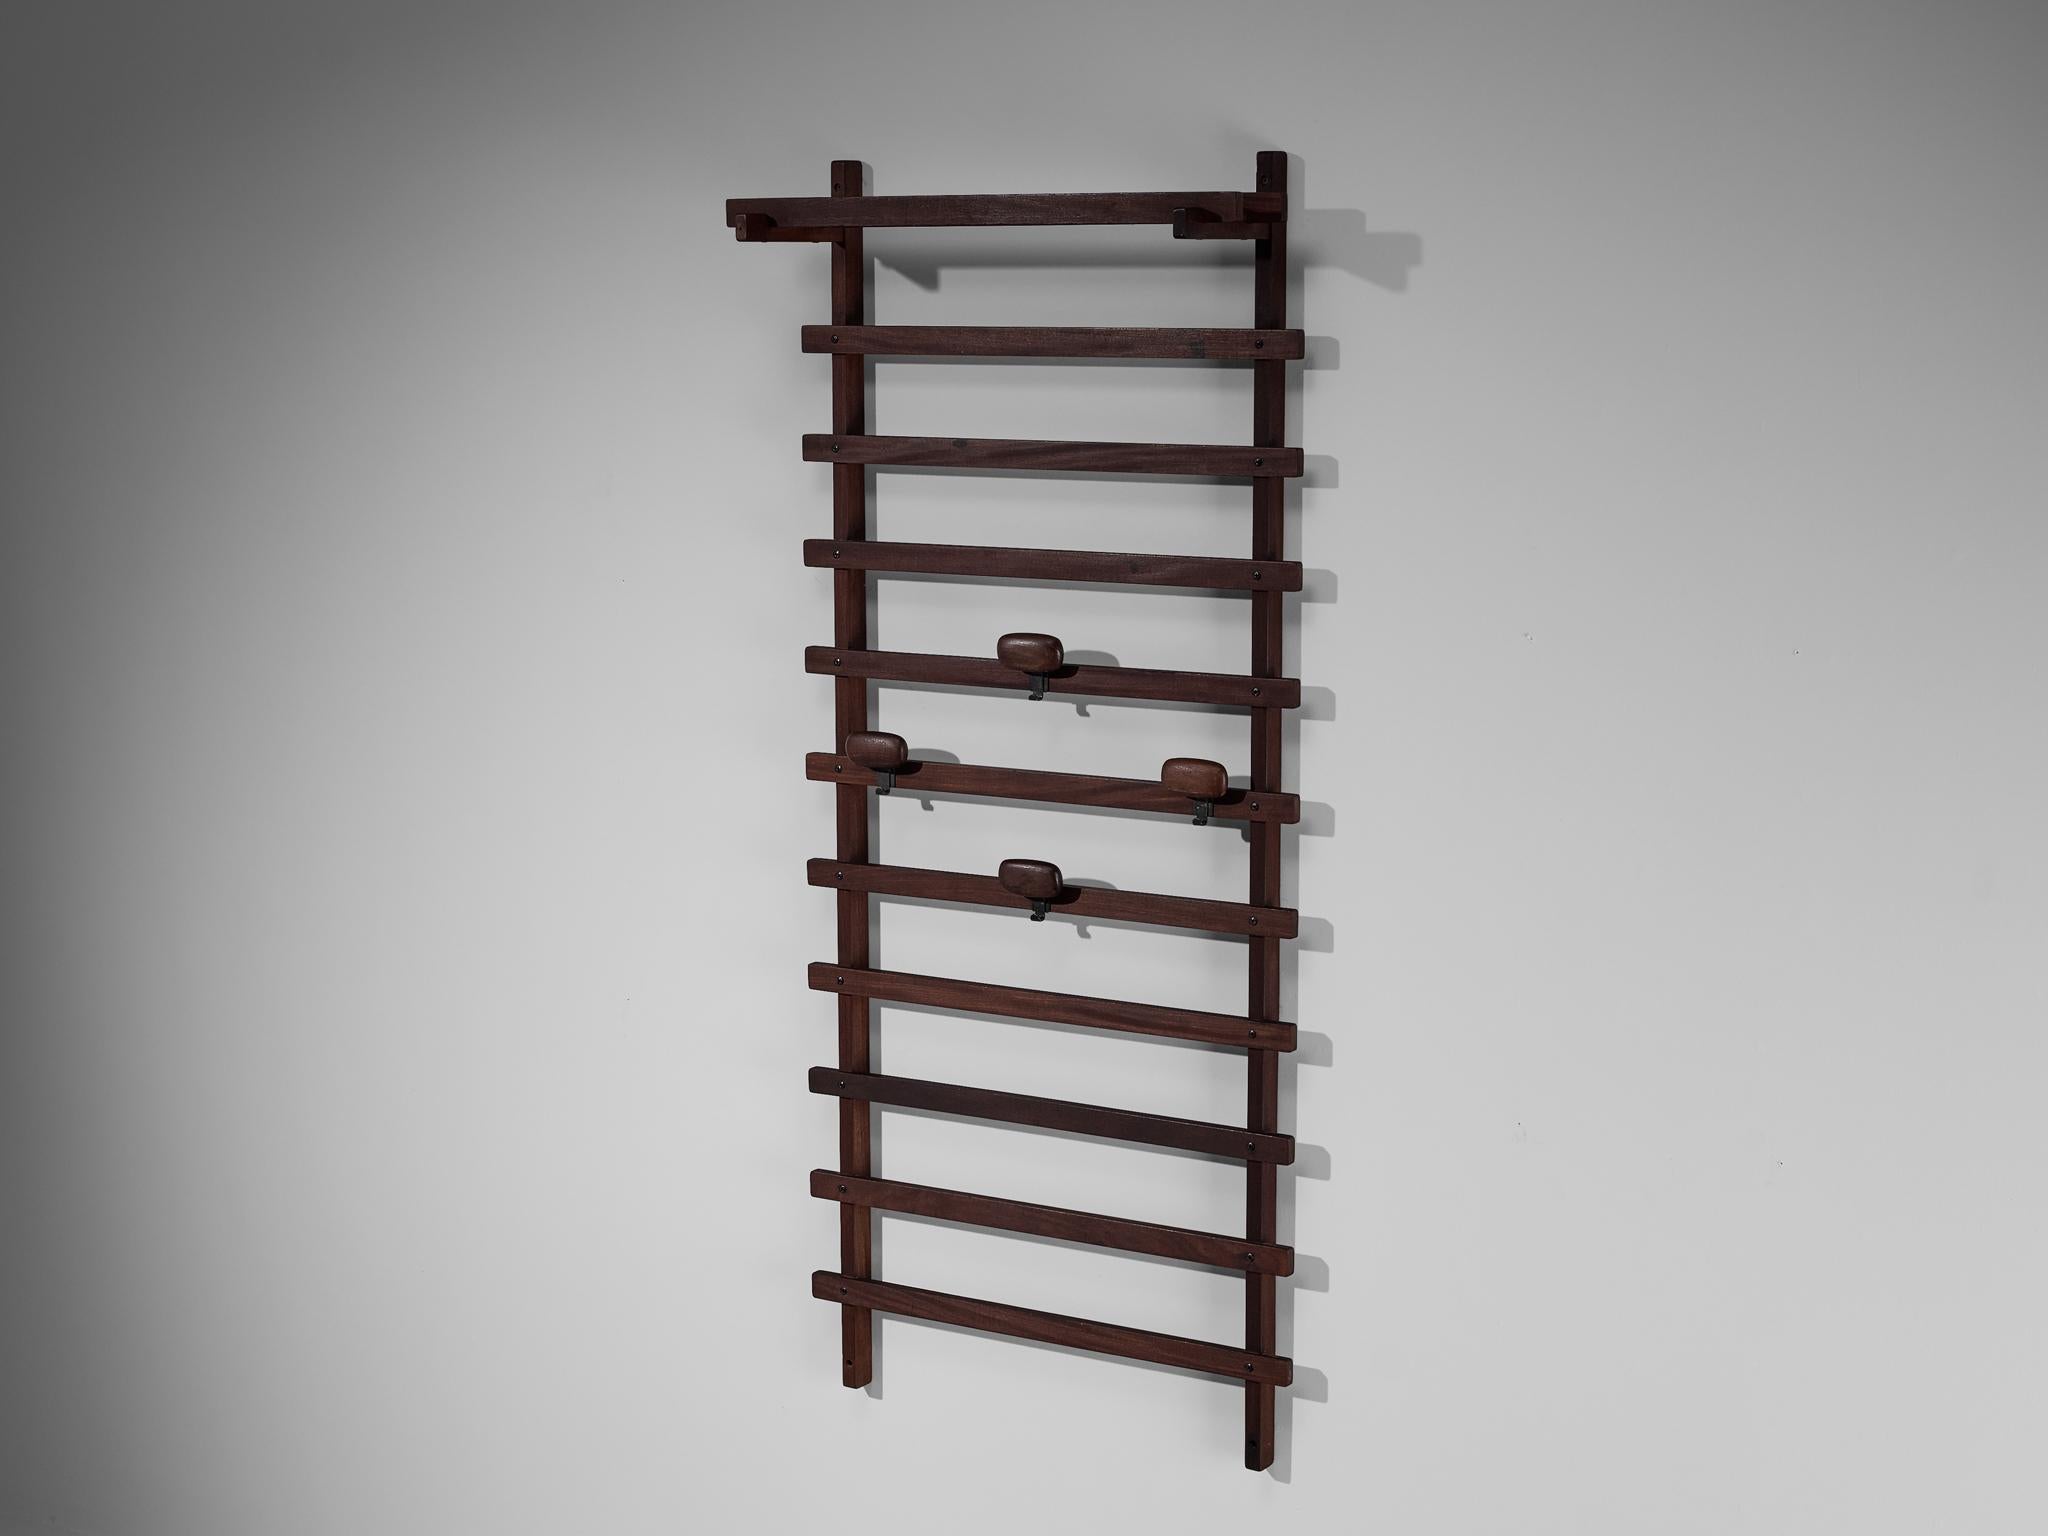 Ezhio Longhi for Elam, wall or coat rack, teak, Italy, 1961.

This hallway setting is executed in solid teak. The set features soft lines and has a warm appearance due to the the warm and dark colour of the stained and patinated teak. The set is